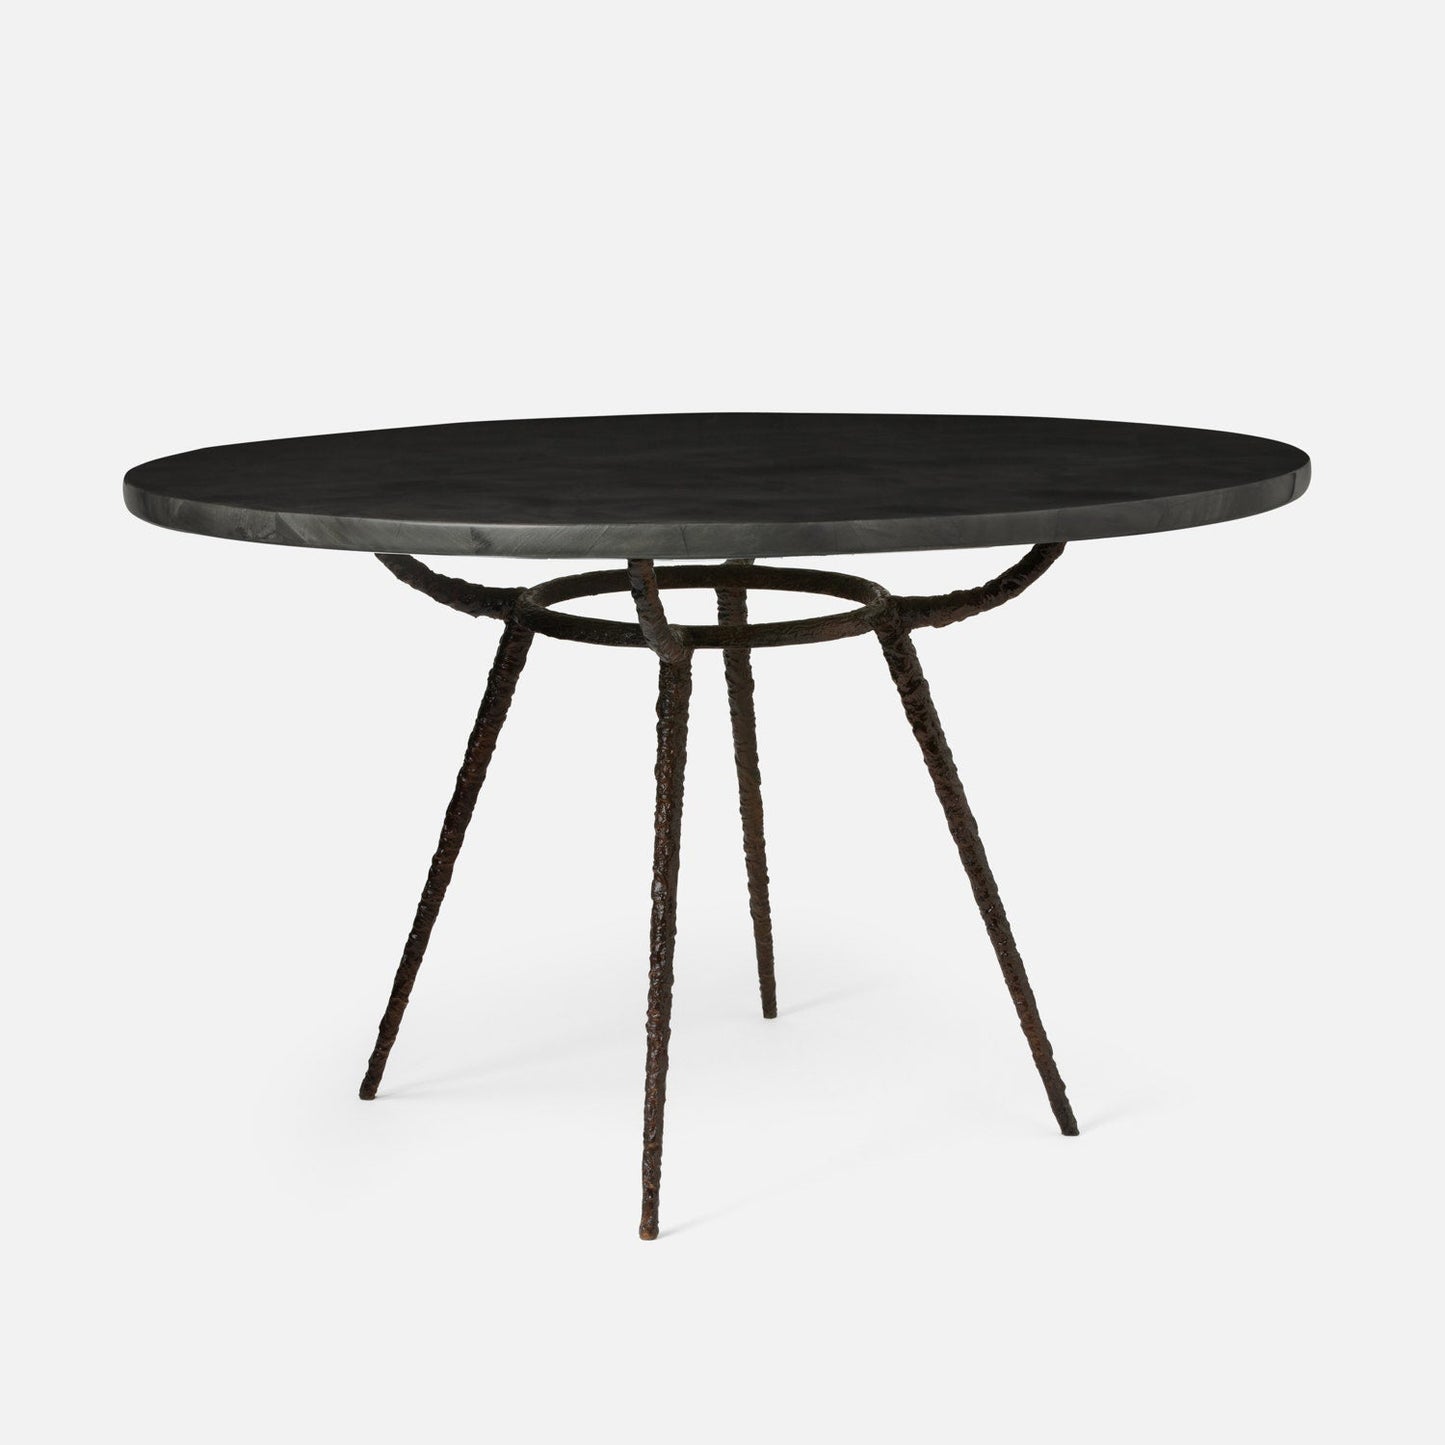 Made Goods Grace 72" x 30" Gold Pitted Iron Dinning Table With Round Dark Faux Horn Table Top